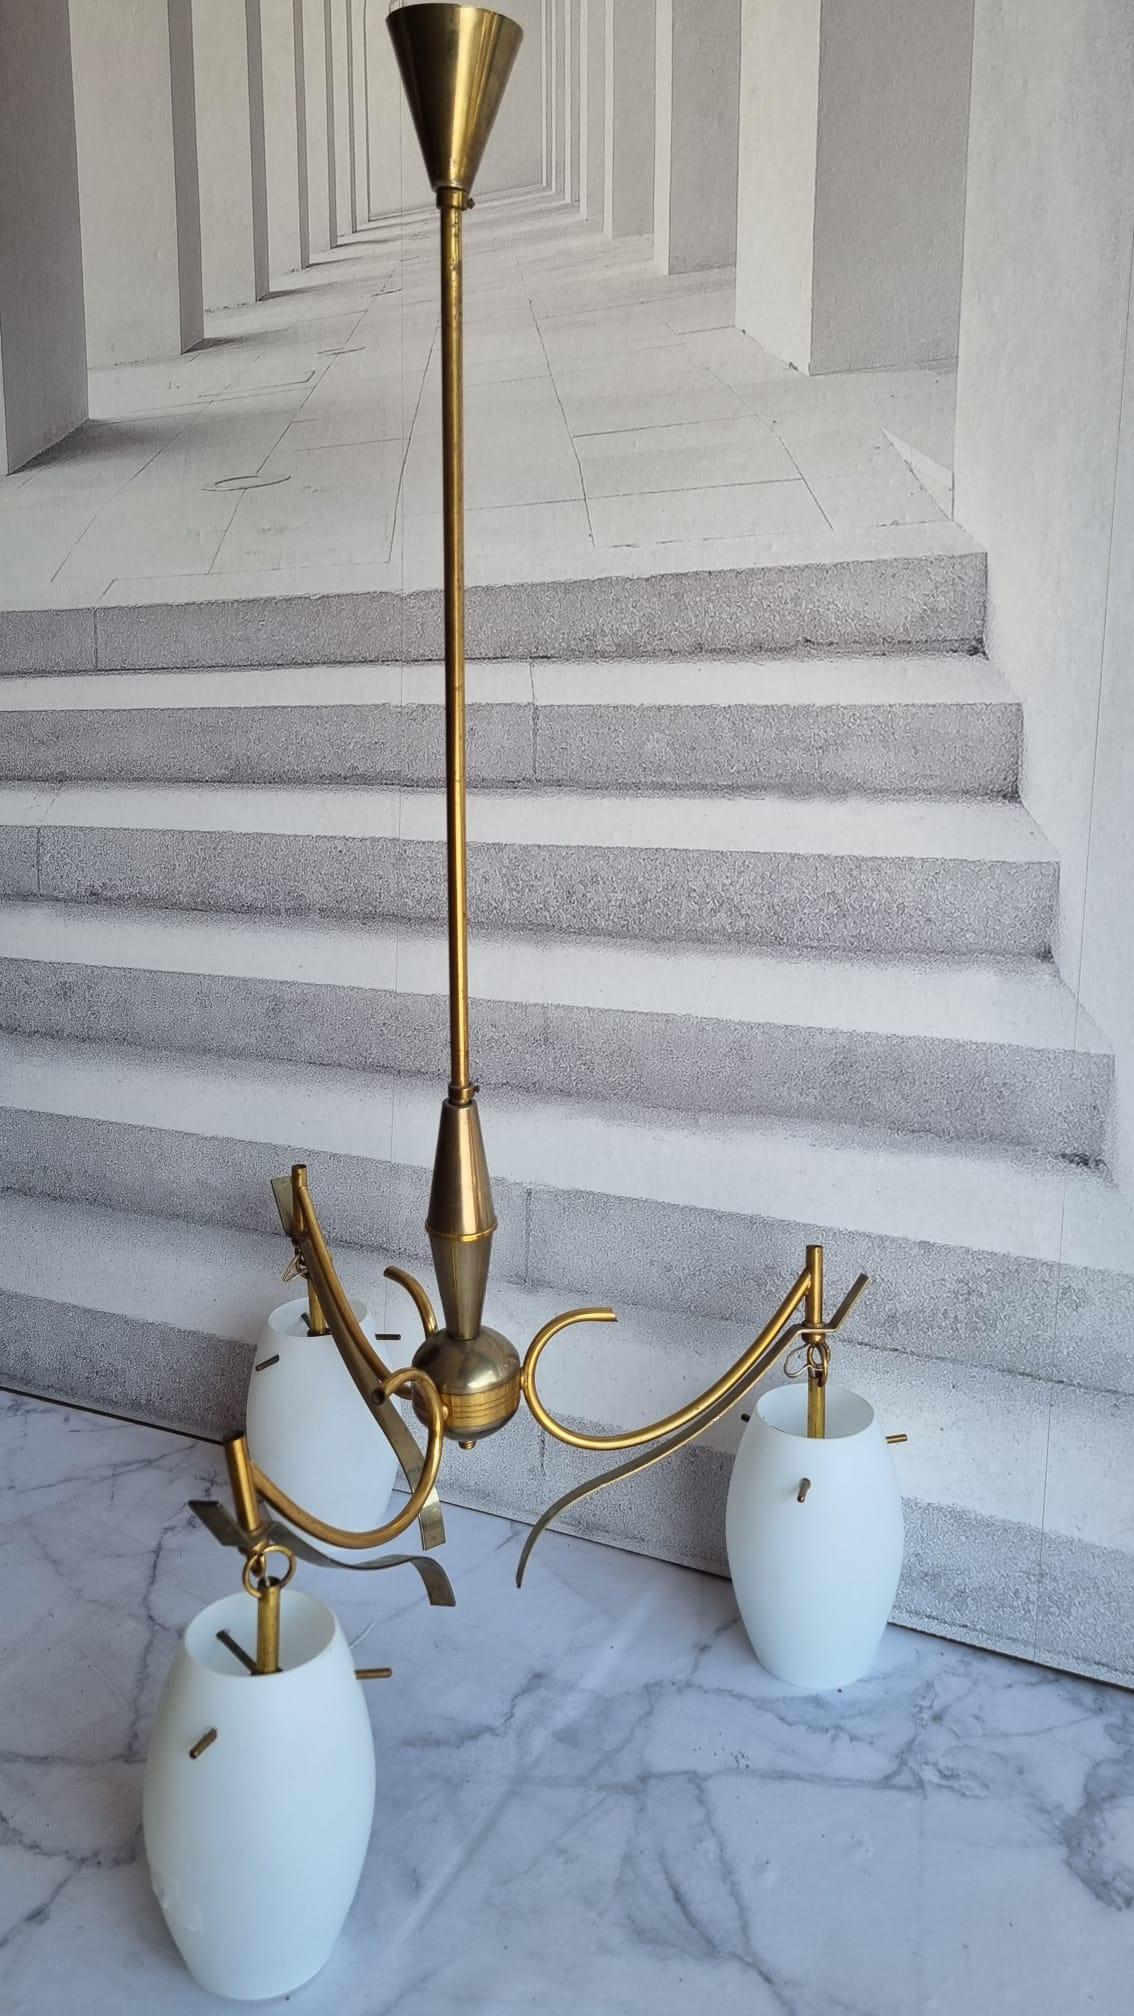 Very decorative and beautiful chandelier made of brass, fitted with three E14 Sockets. Made in Italy in the 1950s, attributed to the famous well known Stilnovo Manufacturer. The Fixture requires three European E14 / 110 Volt Candelabra bulbs, each